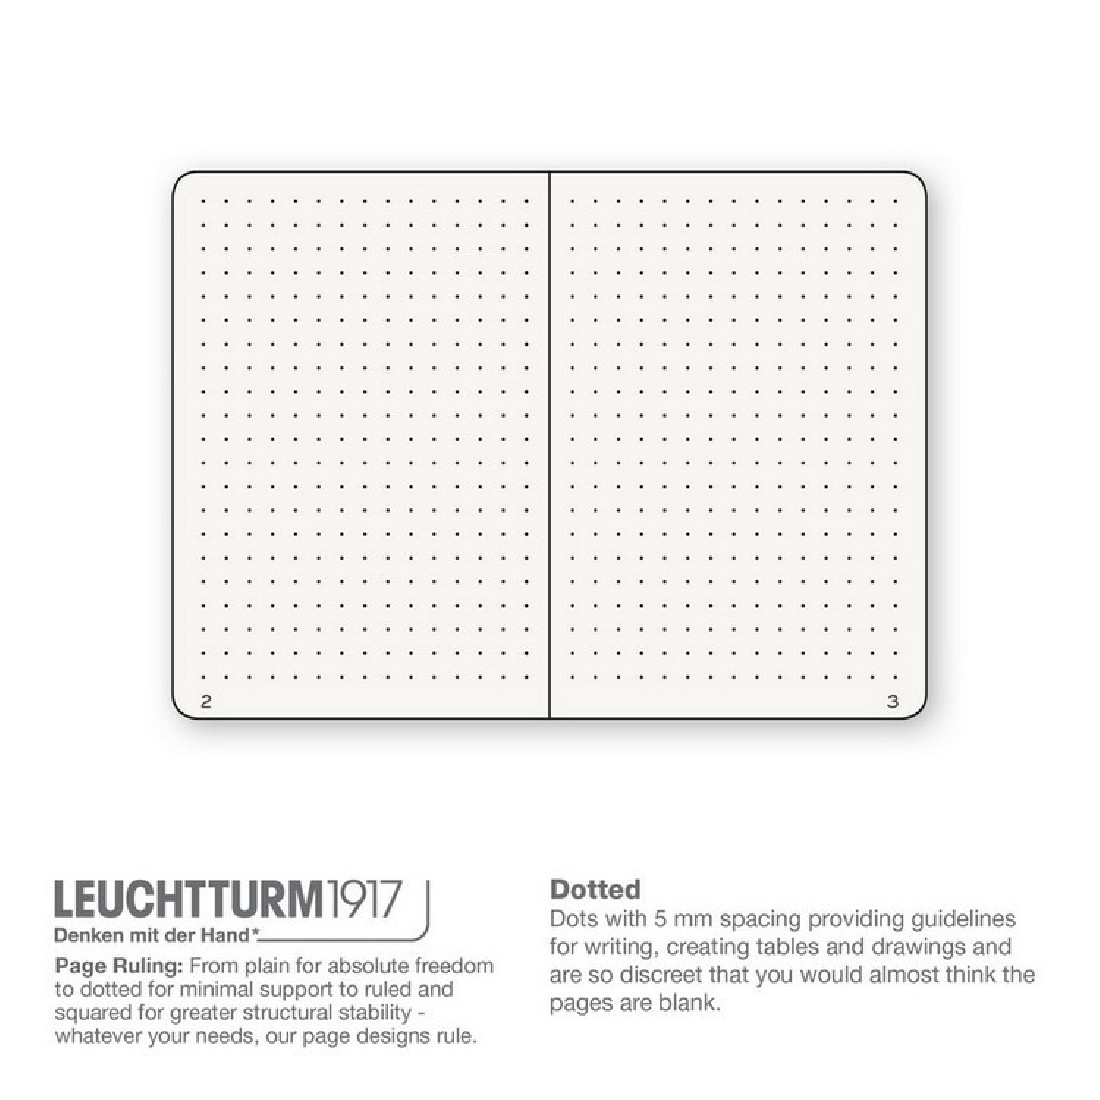 Leuchtturm 1917 Notebook A5 Lilac Dotted Hard Cover L